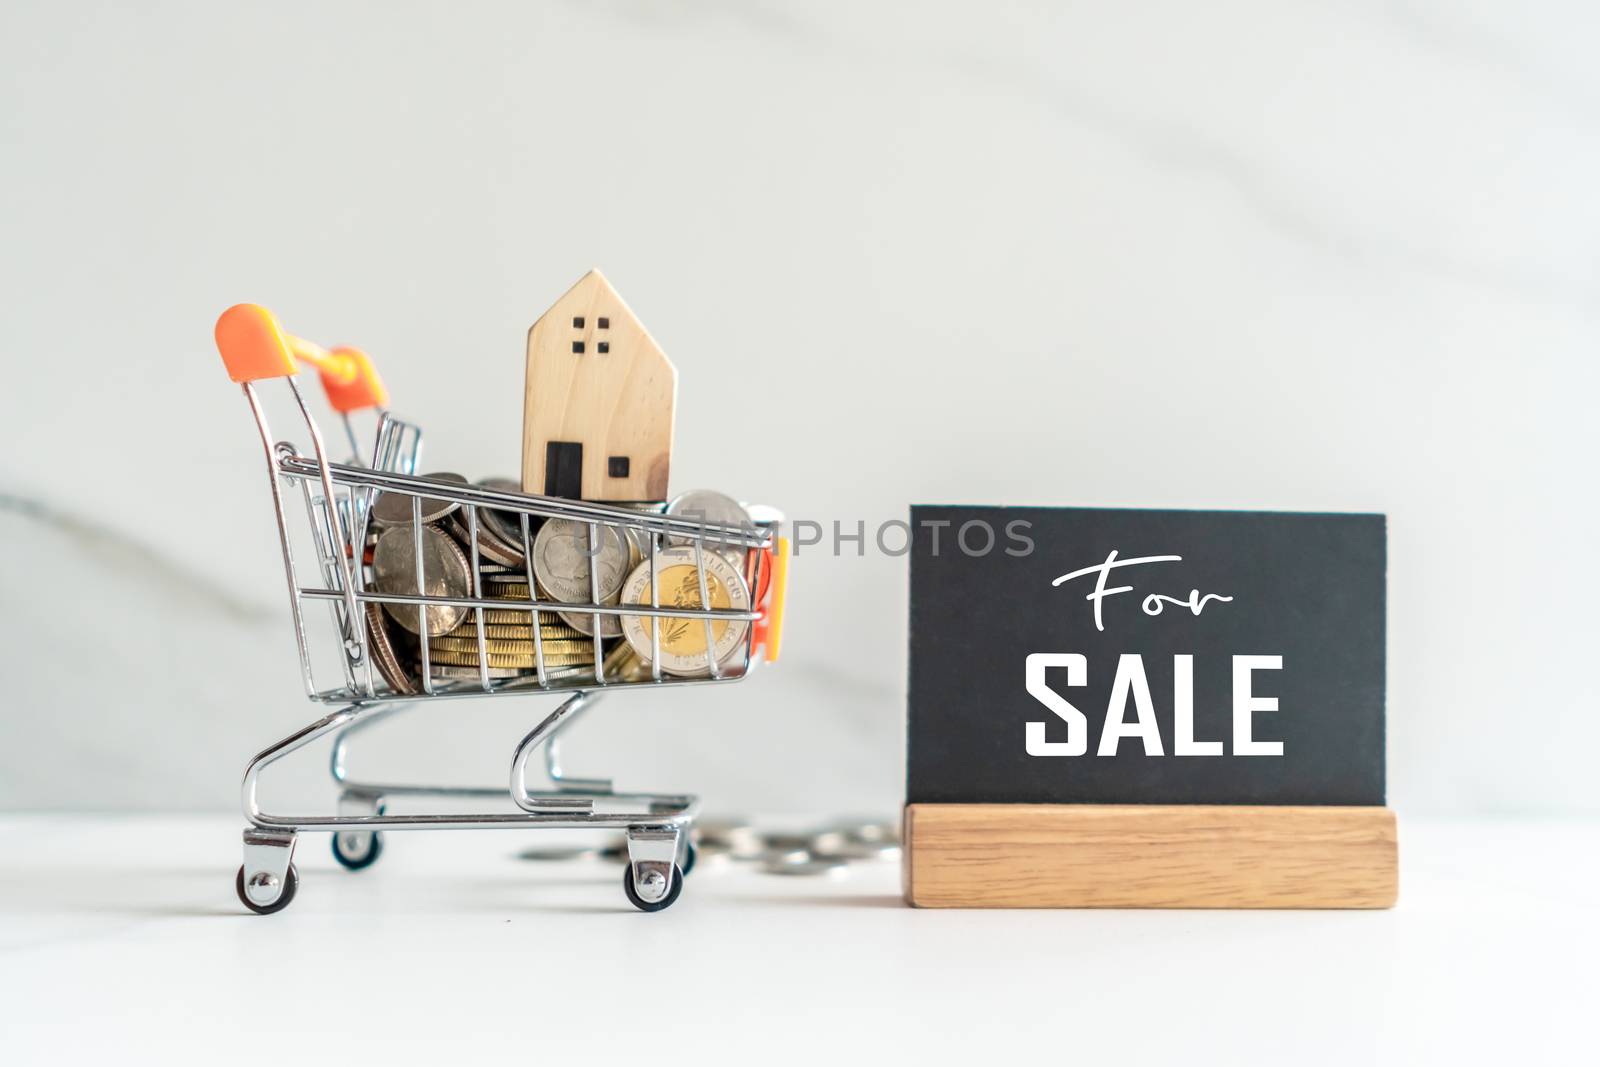 Home model in mini cart model full of coins money with for sale text on blank black wooden sign background.